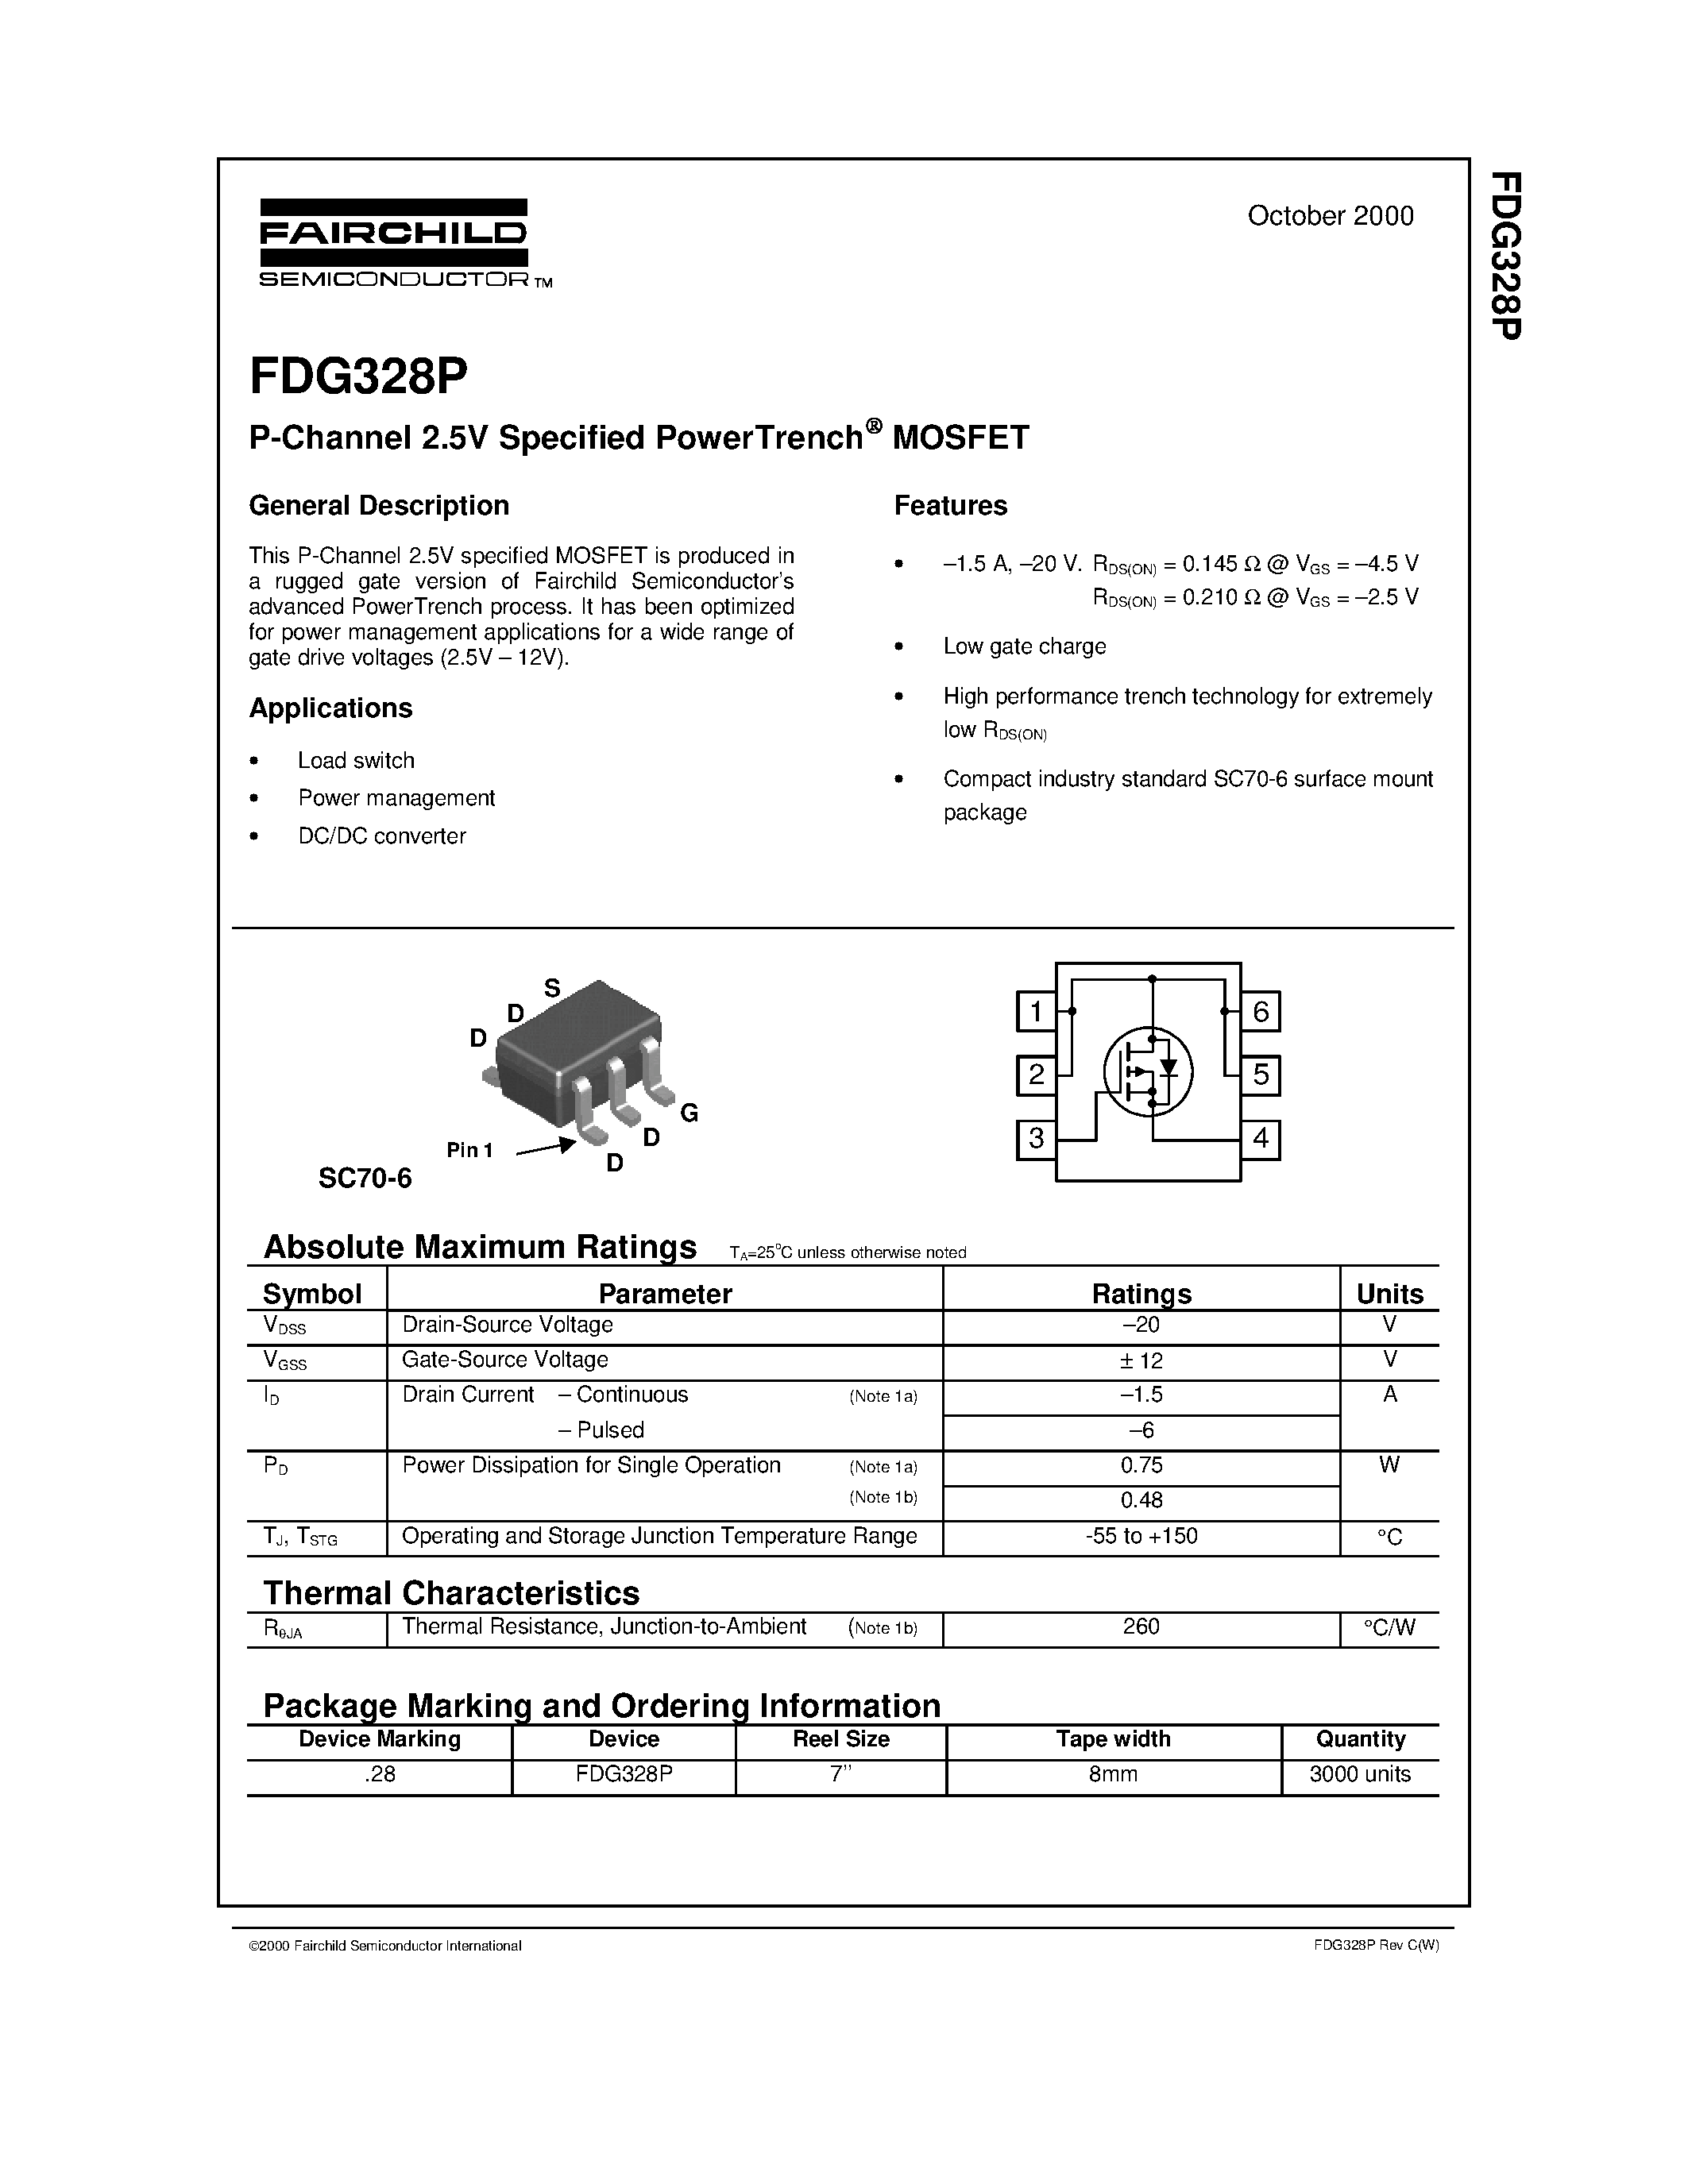 Даташит FDG328P - P-Channel 2.5V Specified PowerTrench MOSFET страница 1